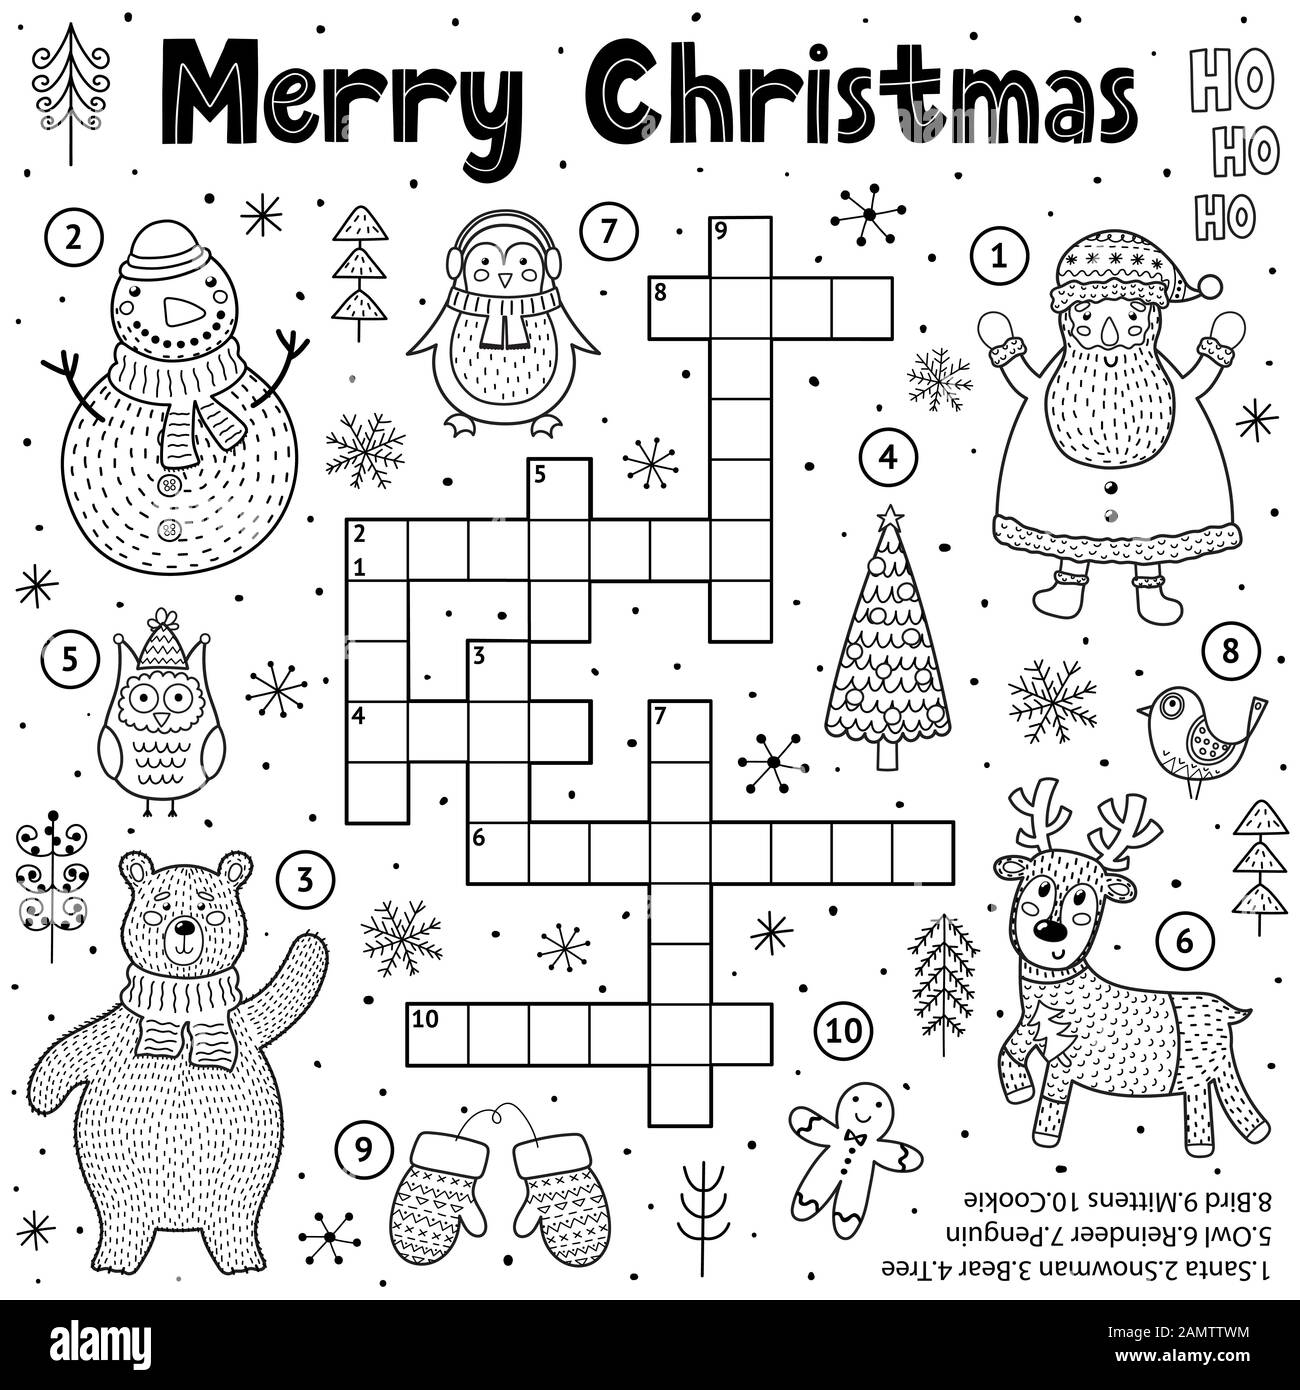 Merry Christmas crossword game for kids. Black and white educational activity page for coloring Stock Vector